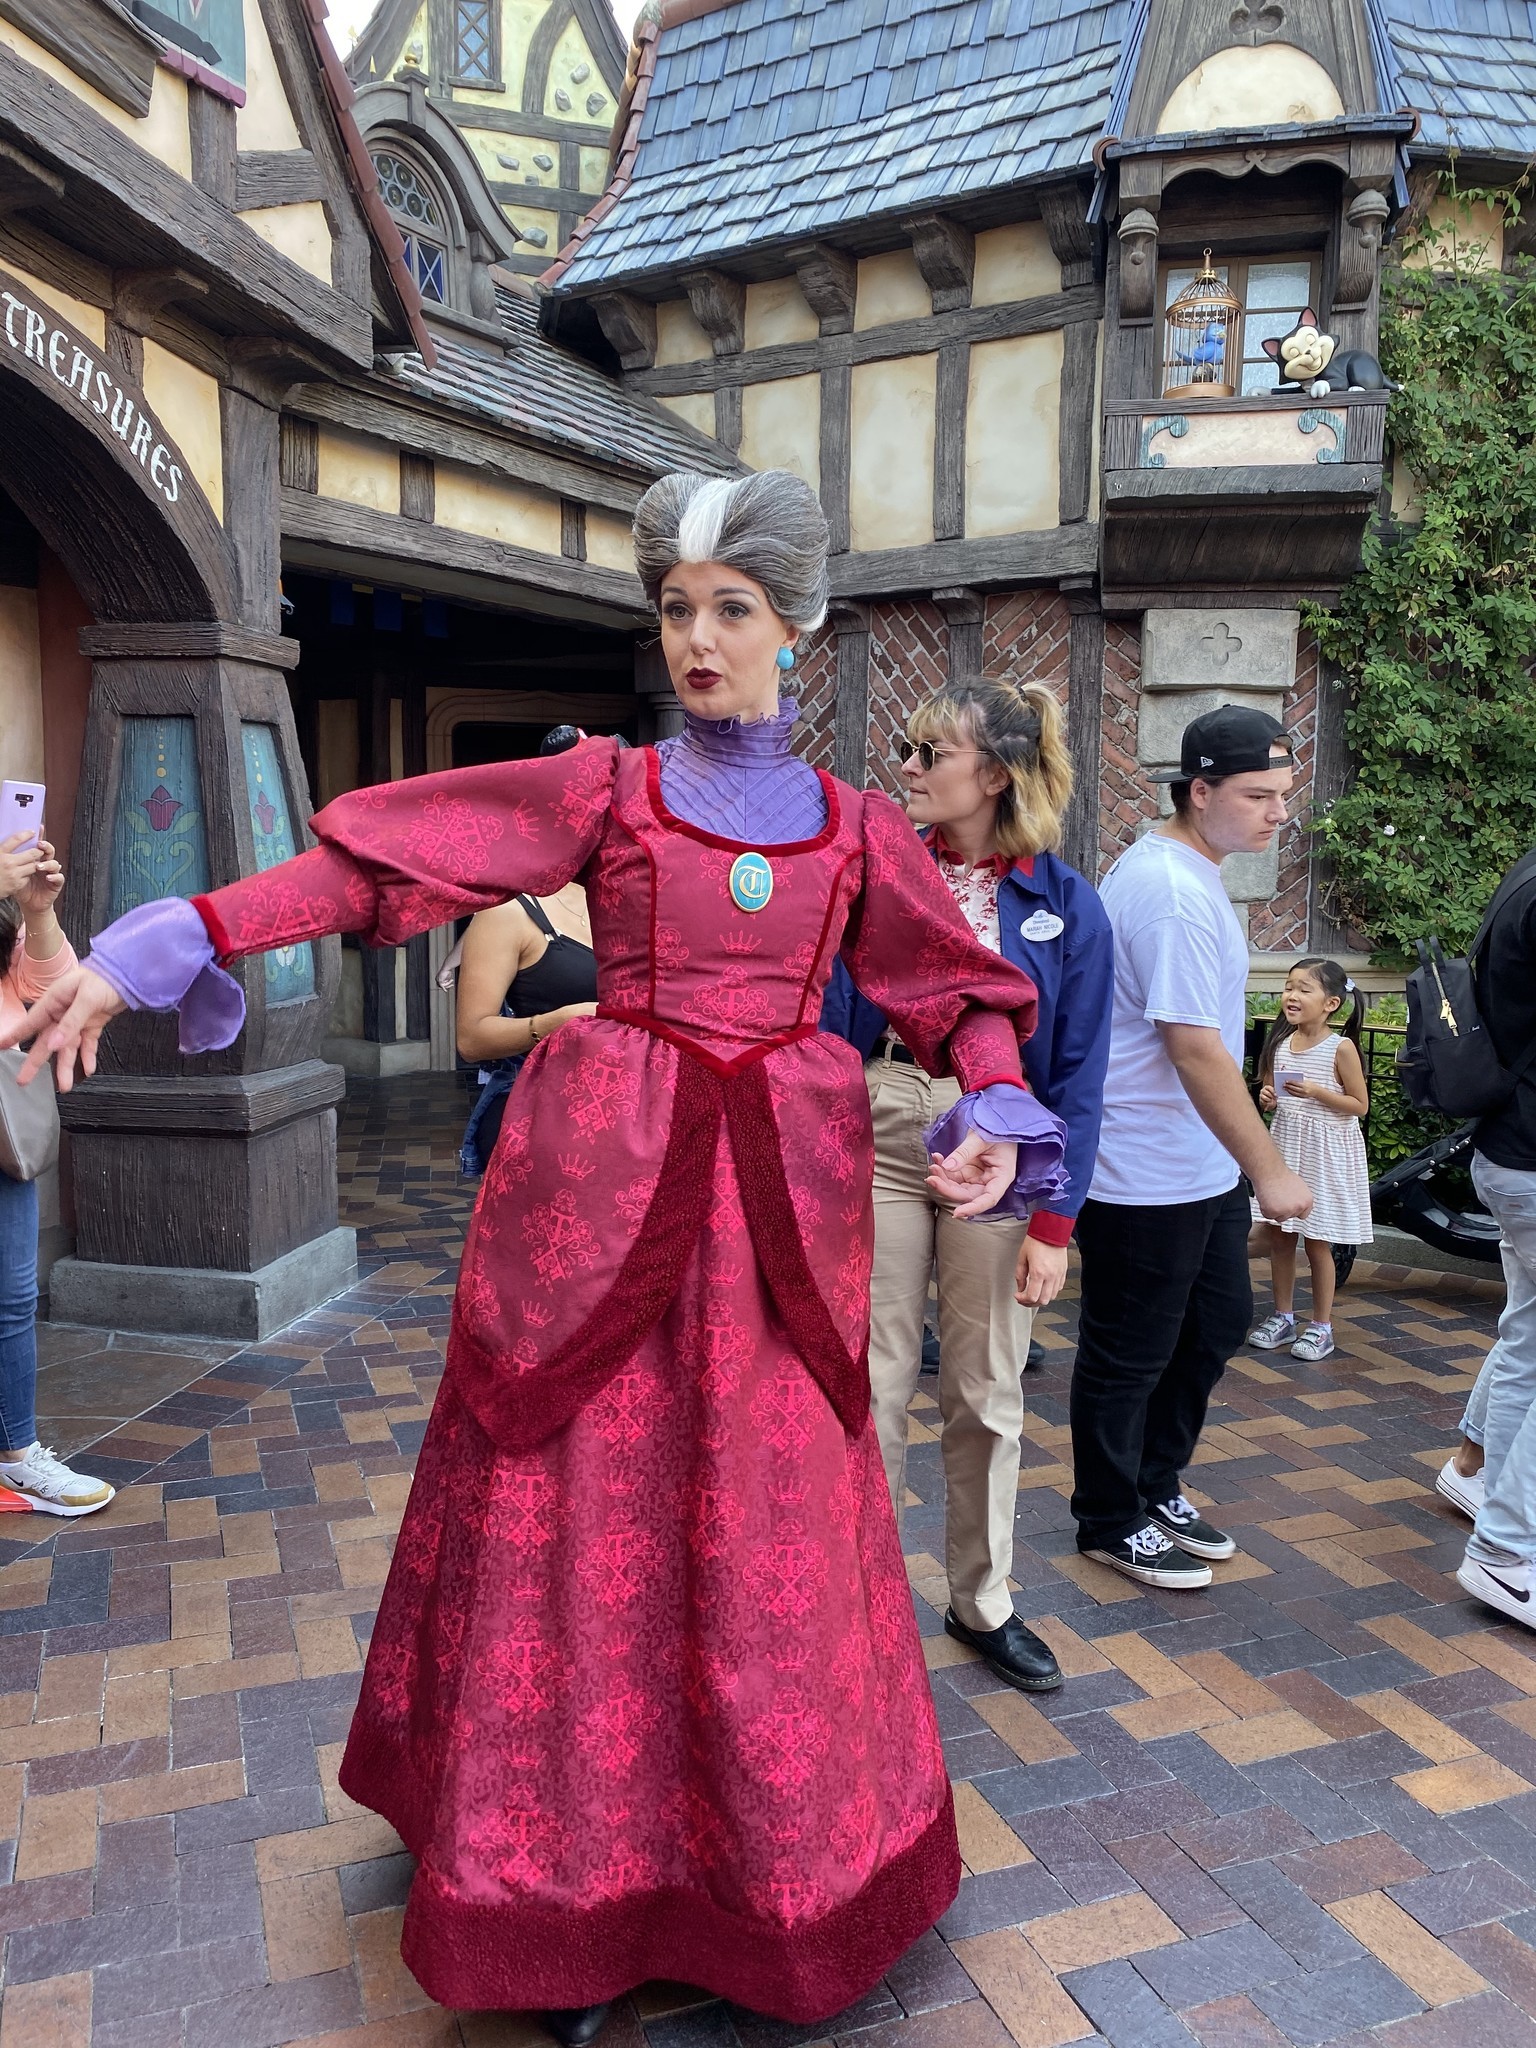 Evil Stepmother waltzes into the picture in Fantasyland at Disneyland